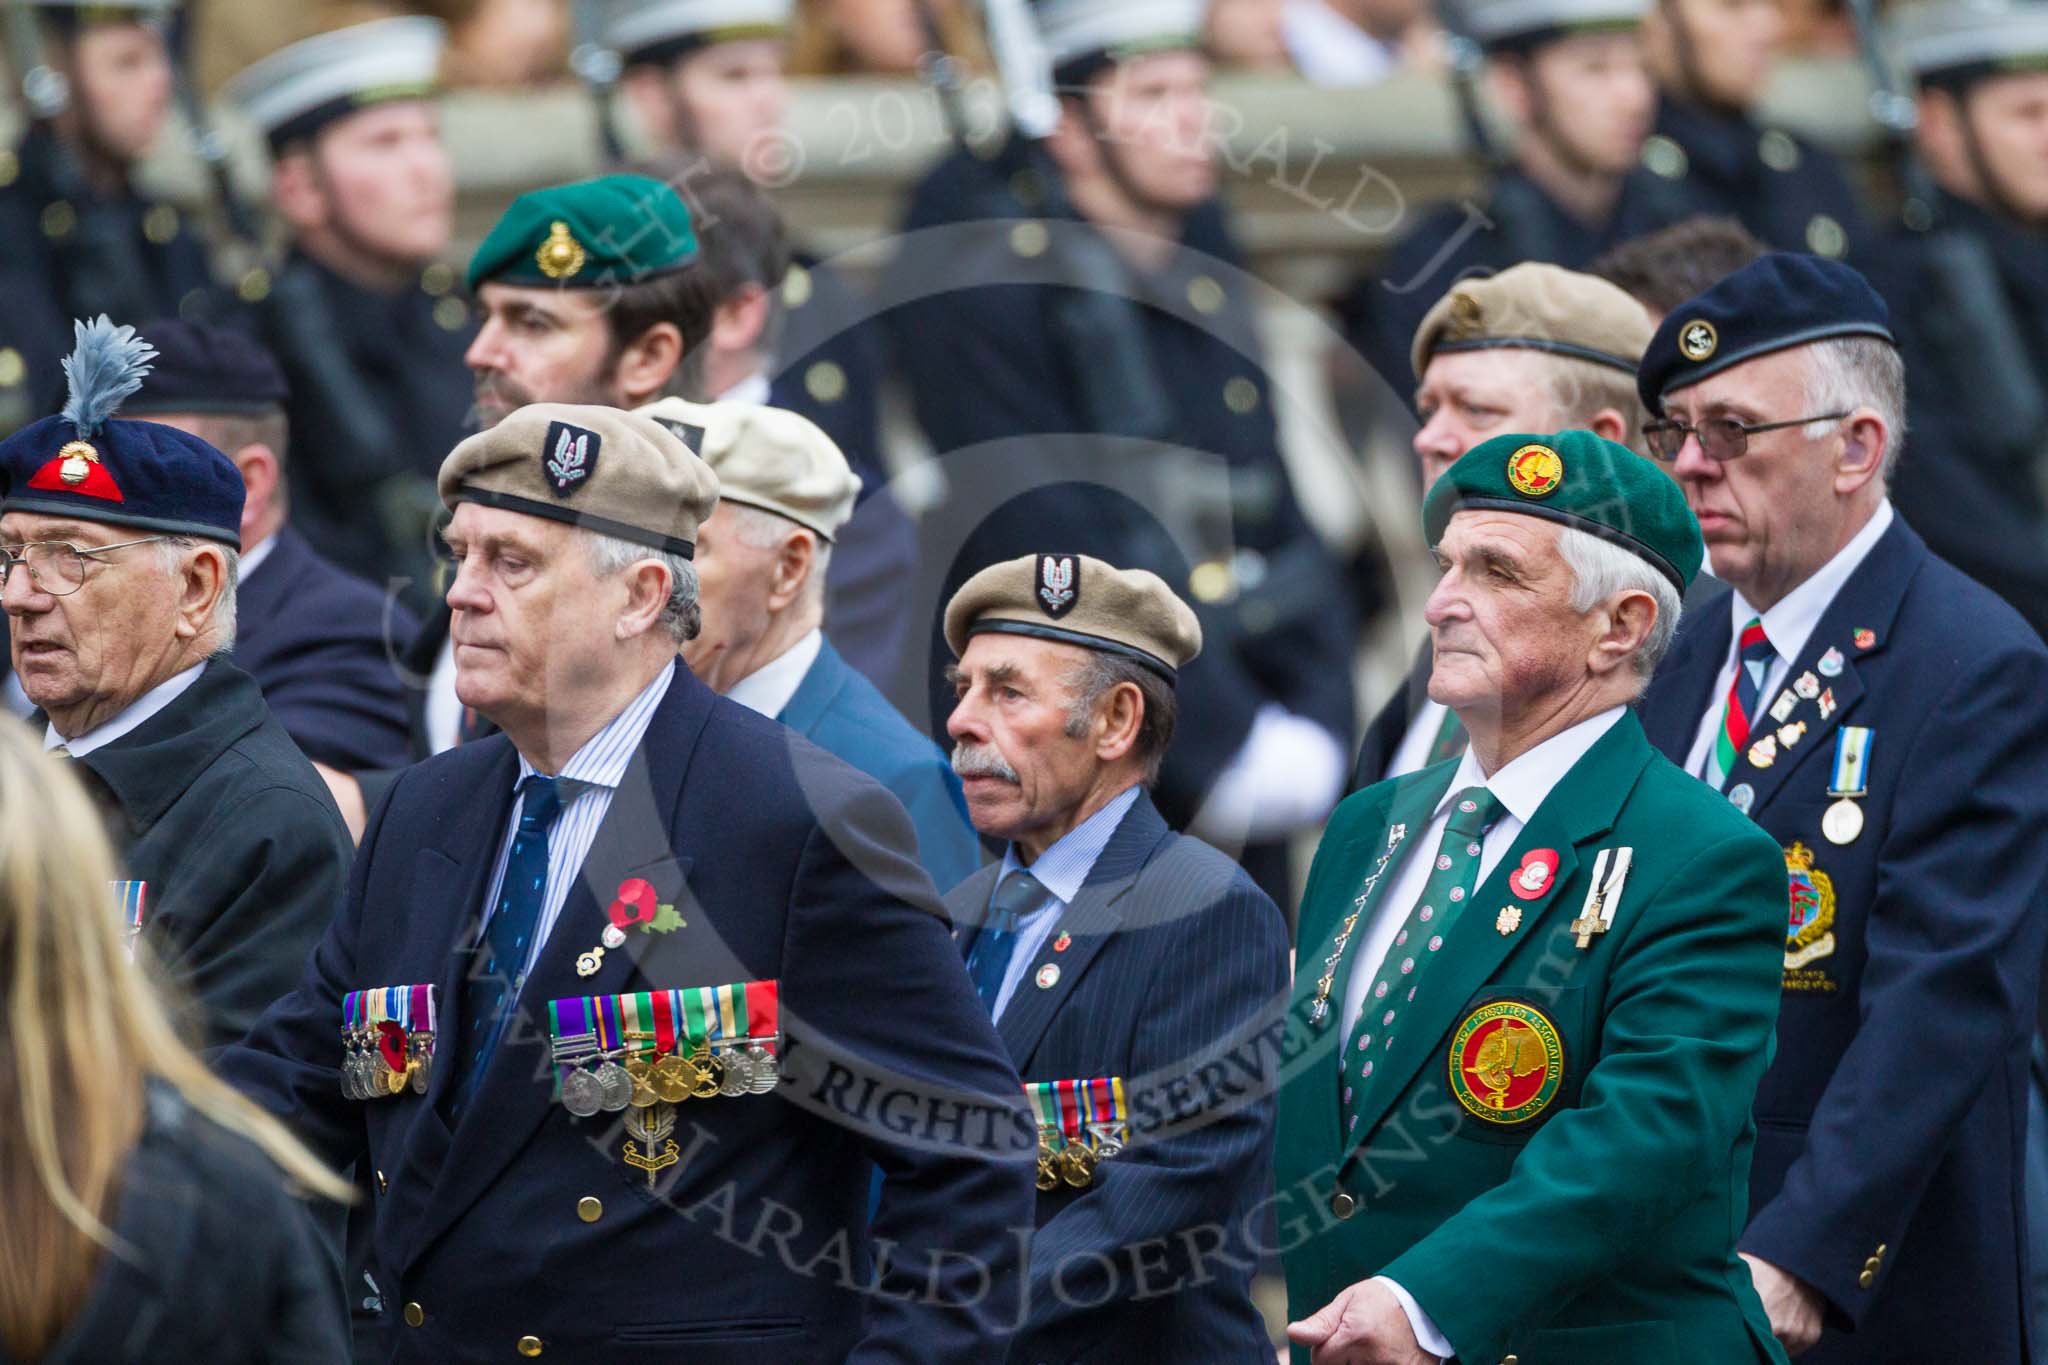 Remembrance Sunday at the Cenotaph 2015: Group D1, Not Forgotten Association.
Cenotaph, Whitehall, London SW1,
London,
Greater London,
United Kingdom,
on 08 November 2015 at 11:51, image #581